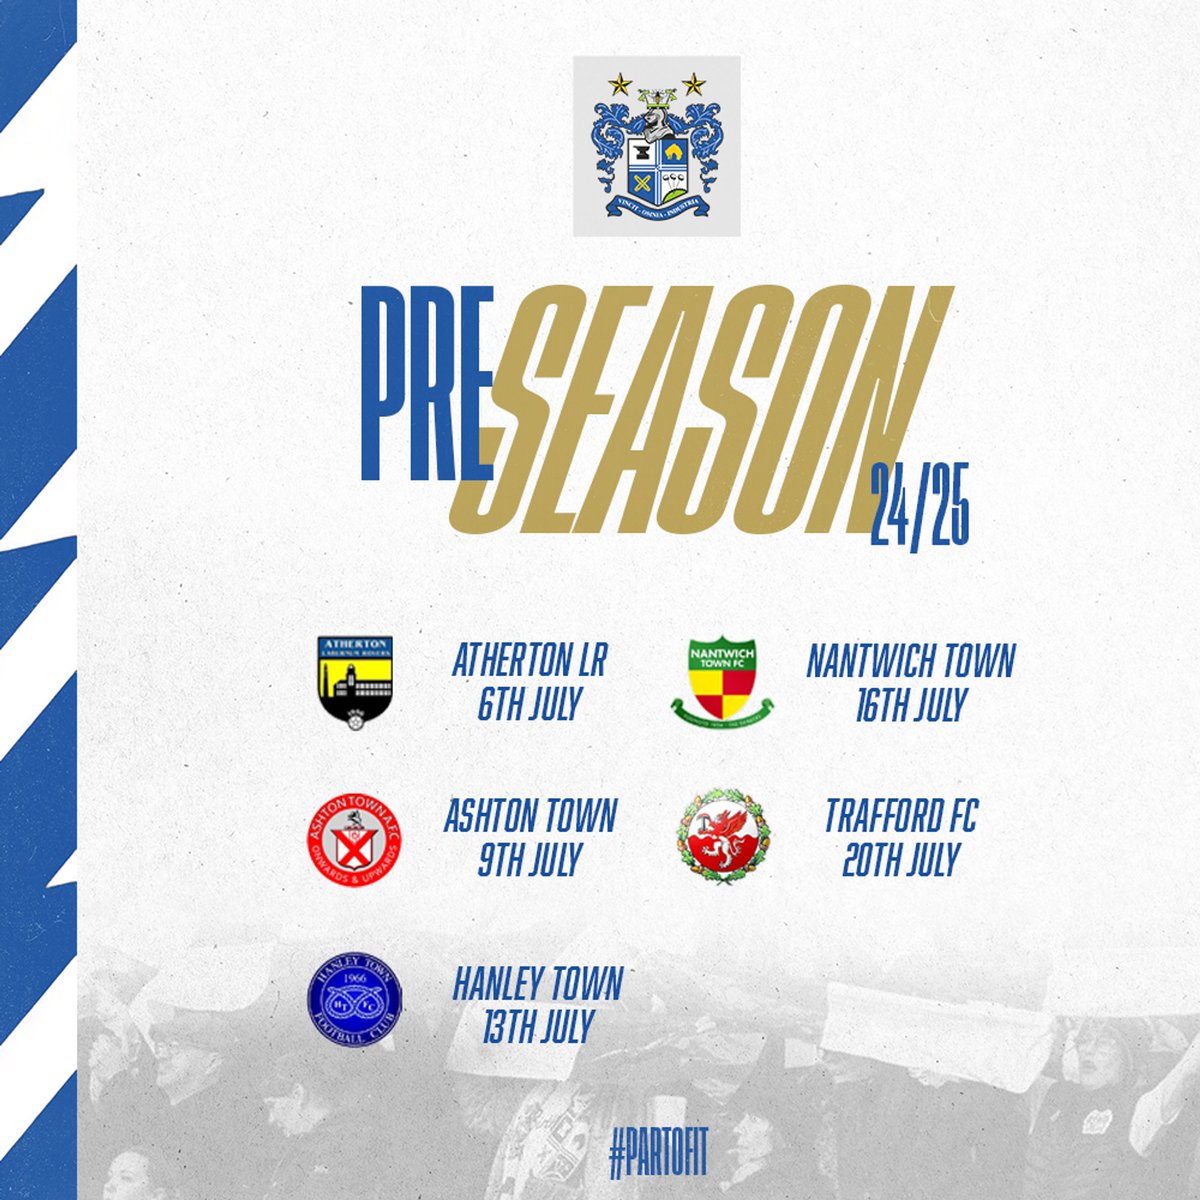 ⚪🔵Pre Season Update: We are delighted to announce that we will travel to The Shawe View Stadium on Saturday 20th July to face NPL side Trafford FC. Read more about our full pre season schedule here ⬇️ buryfc.co.uk/pre-season-202… #BuryFC #PartOfIt